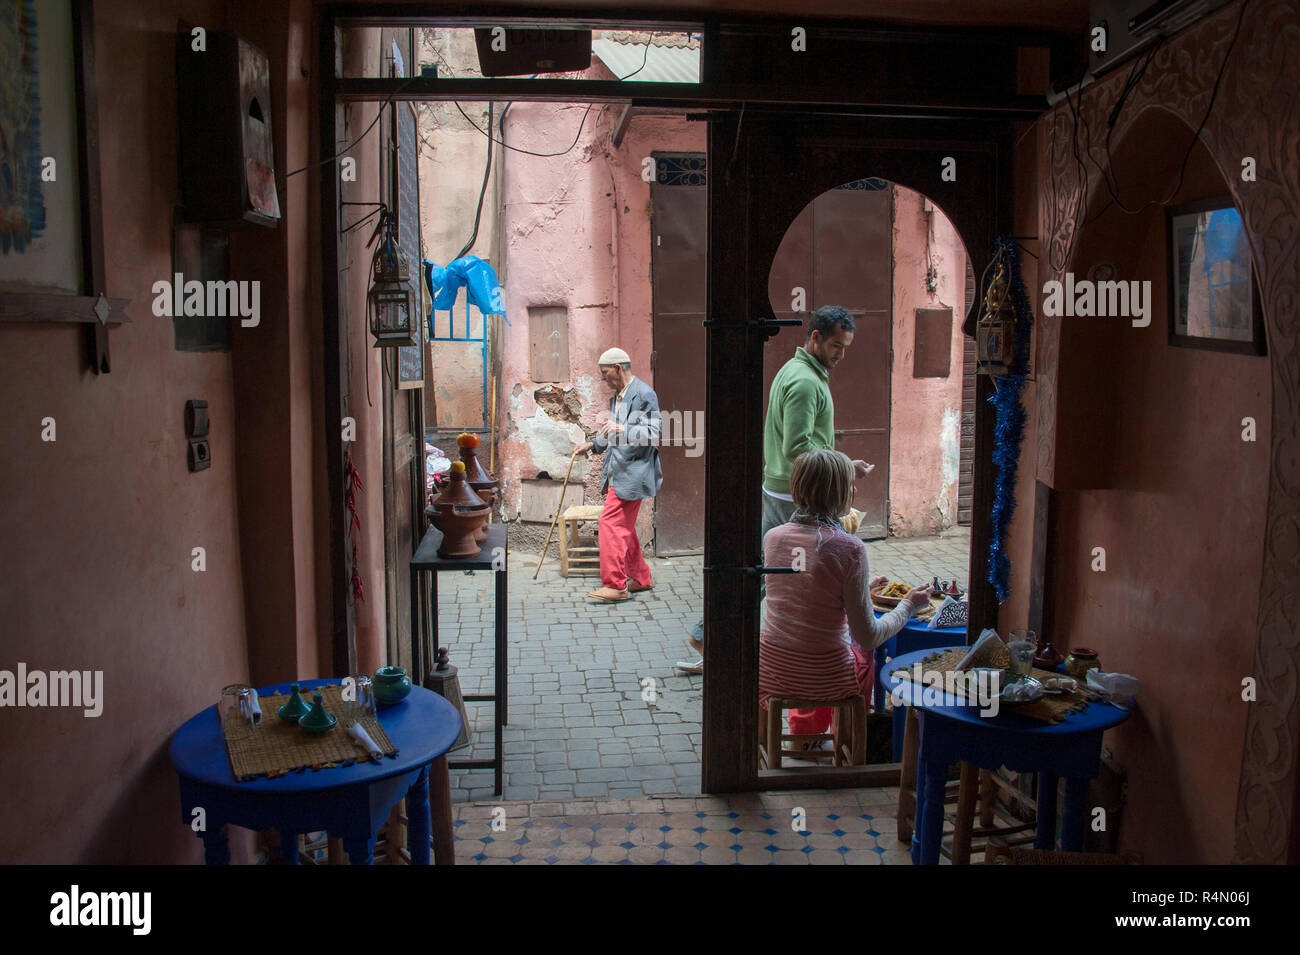 18-04-11. Marrakech, Morocco.  Street scene in the medina, photographed from inside a cafe looking out. Photo © Simon Grosset / Q Photography Stock Photo